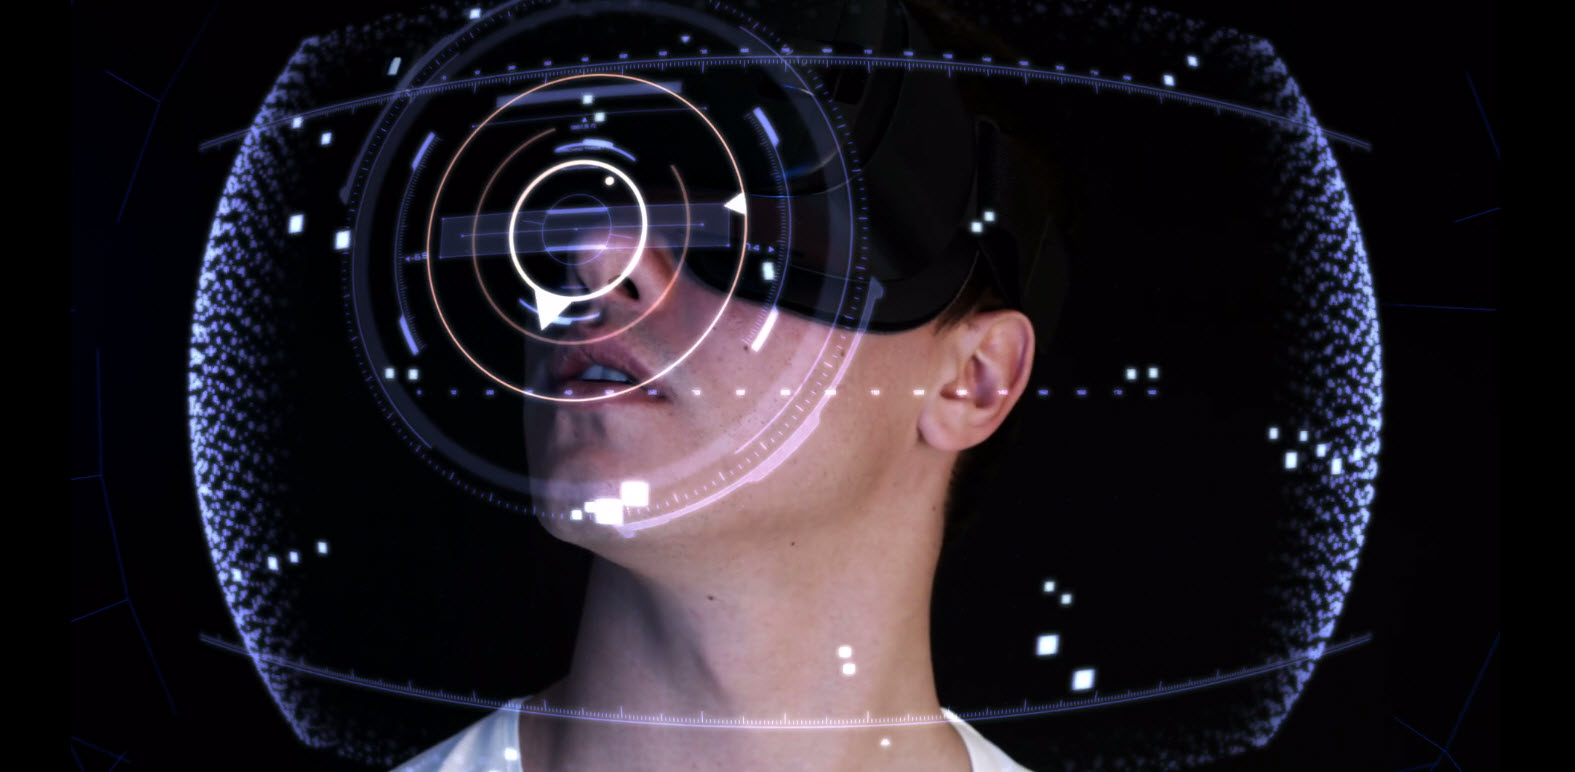 This is How VR Can Manipulate Our Minds